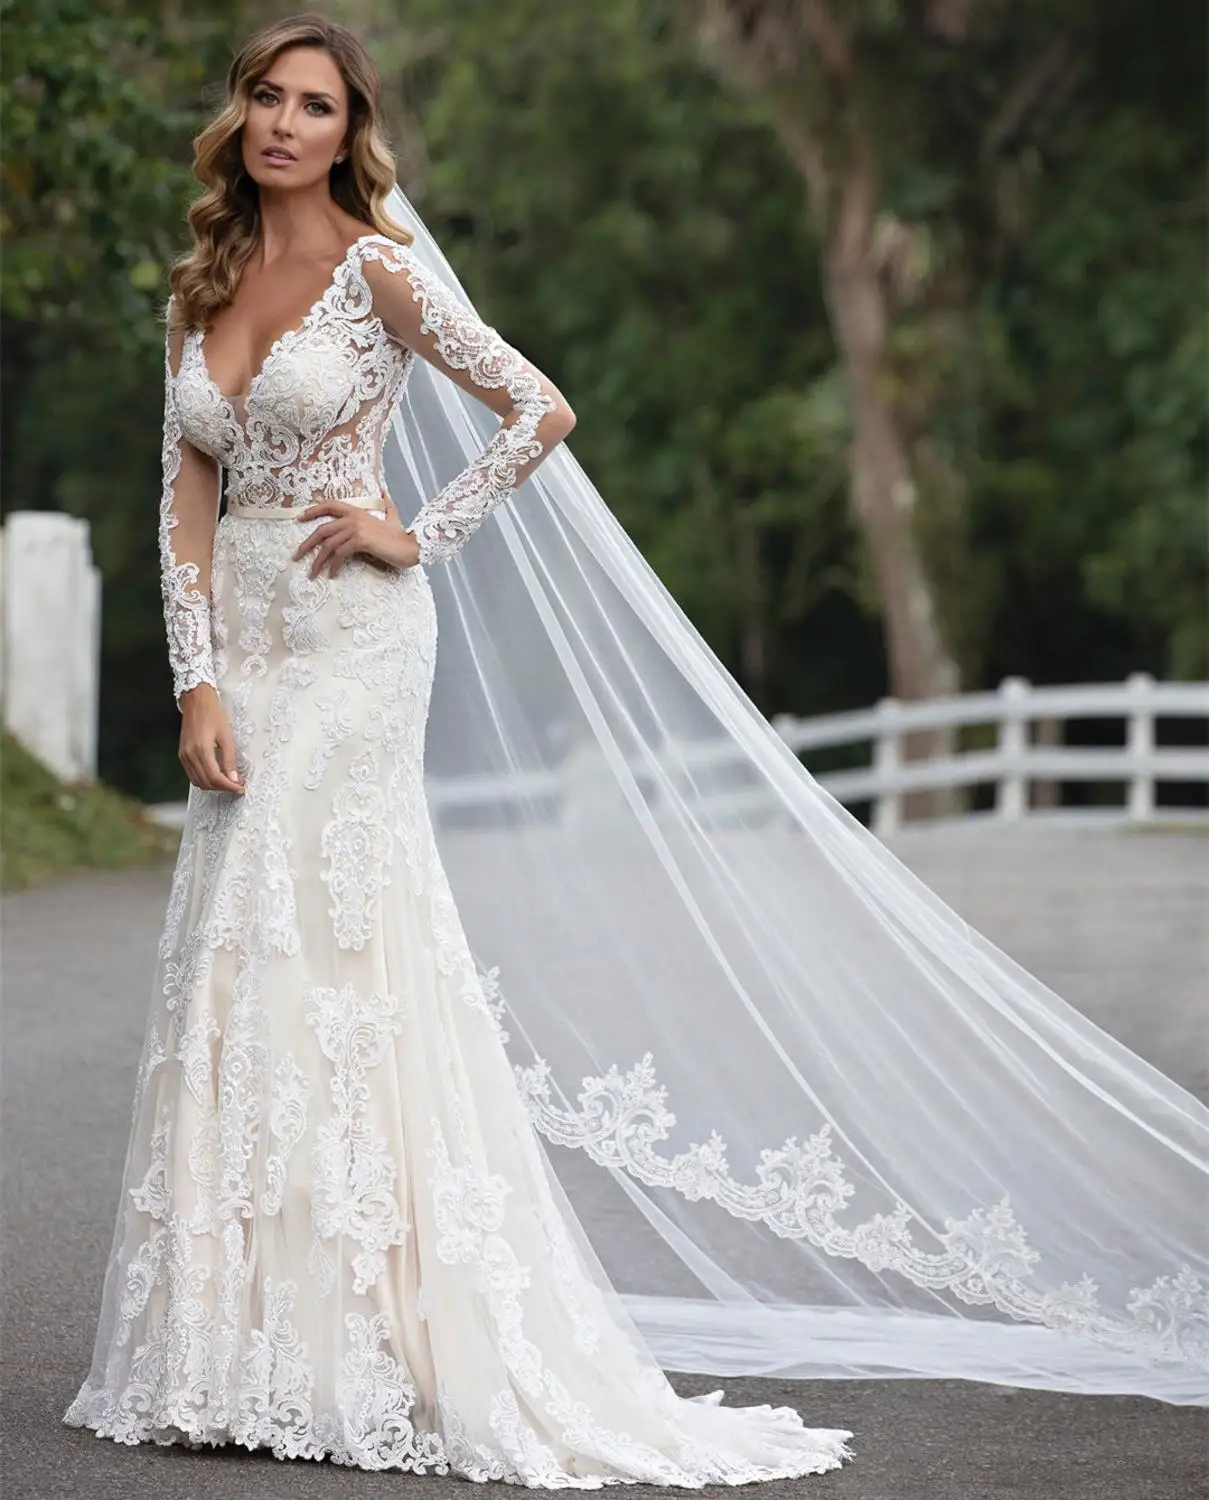 Clothfun Women's Lace Mermaid Beach Wedding Dresses for Bride 2021 with Sleeves Bridal Gowns Long 